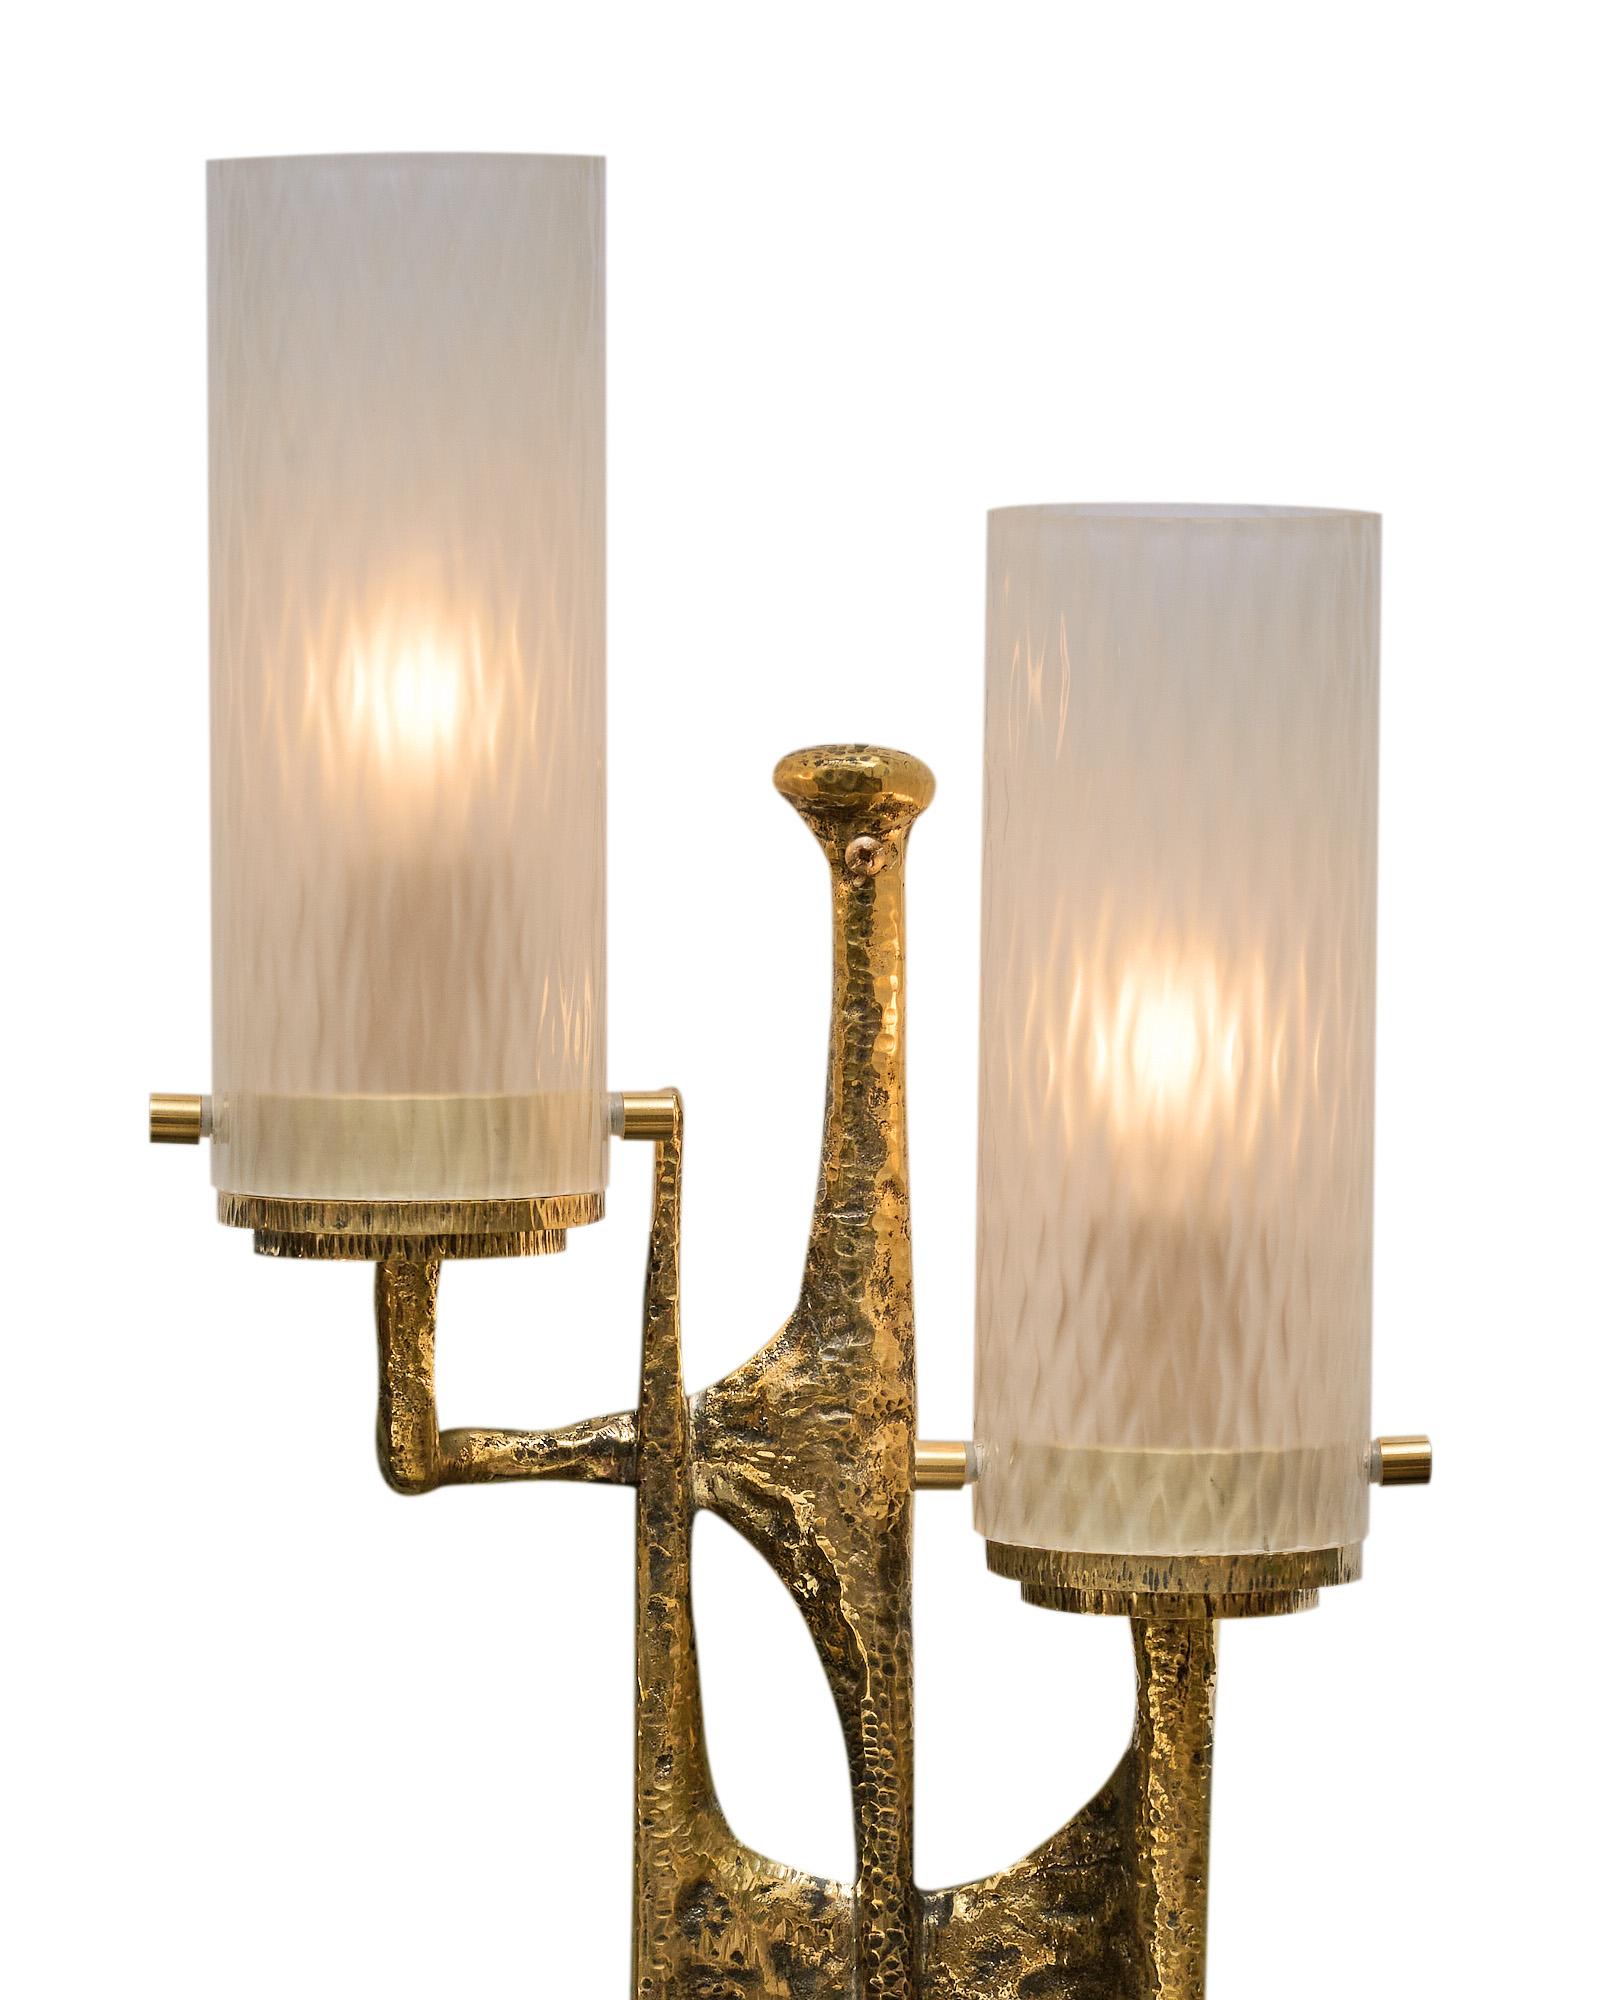 Pair of wall sconces, in the Brutalist style, with hammered bronze structures each gilded and topped with two Murano glass cylindrical shades. We are drawn to the unique style and hand-crafted elements of the high-quality materials. They have been